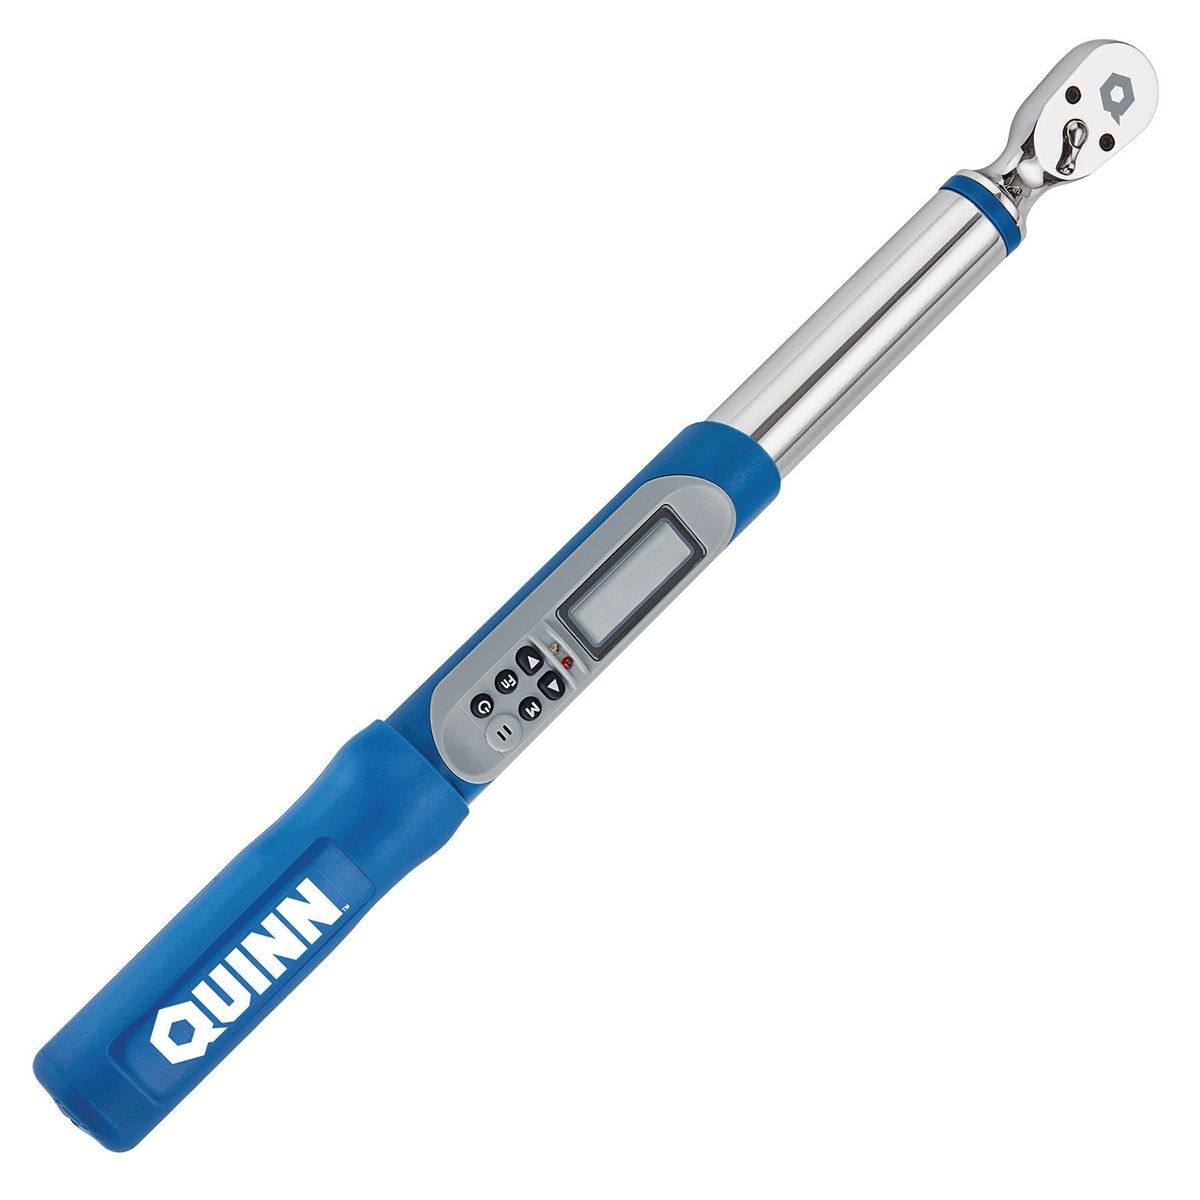 QUINN 3/8 in. Drive 5-100 ft. lb. Digital Angle Torque Wrench